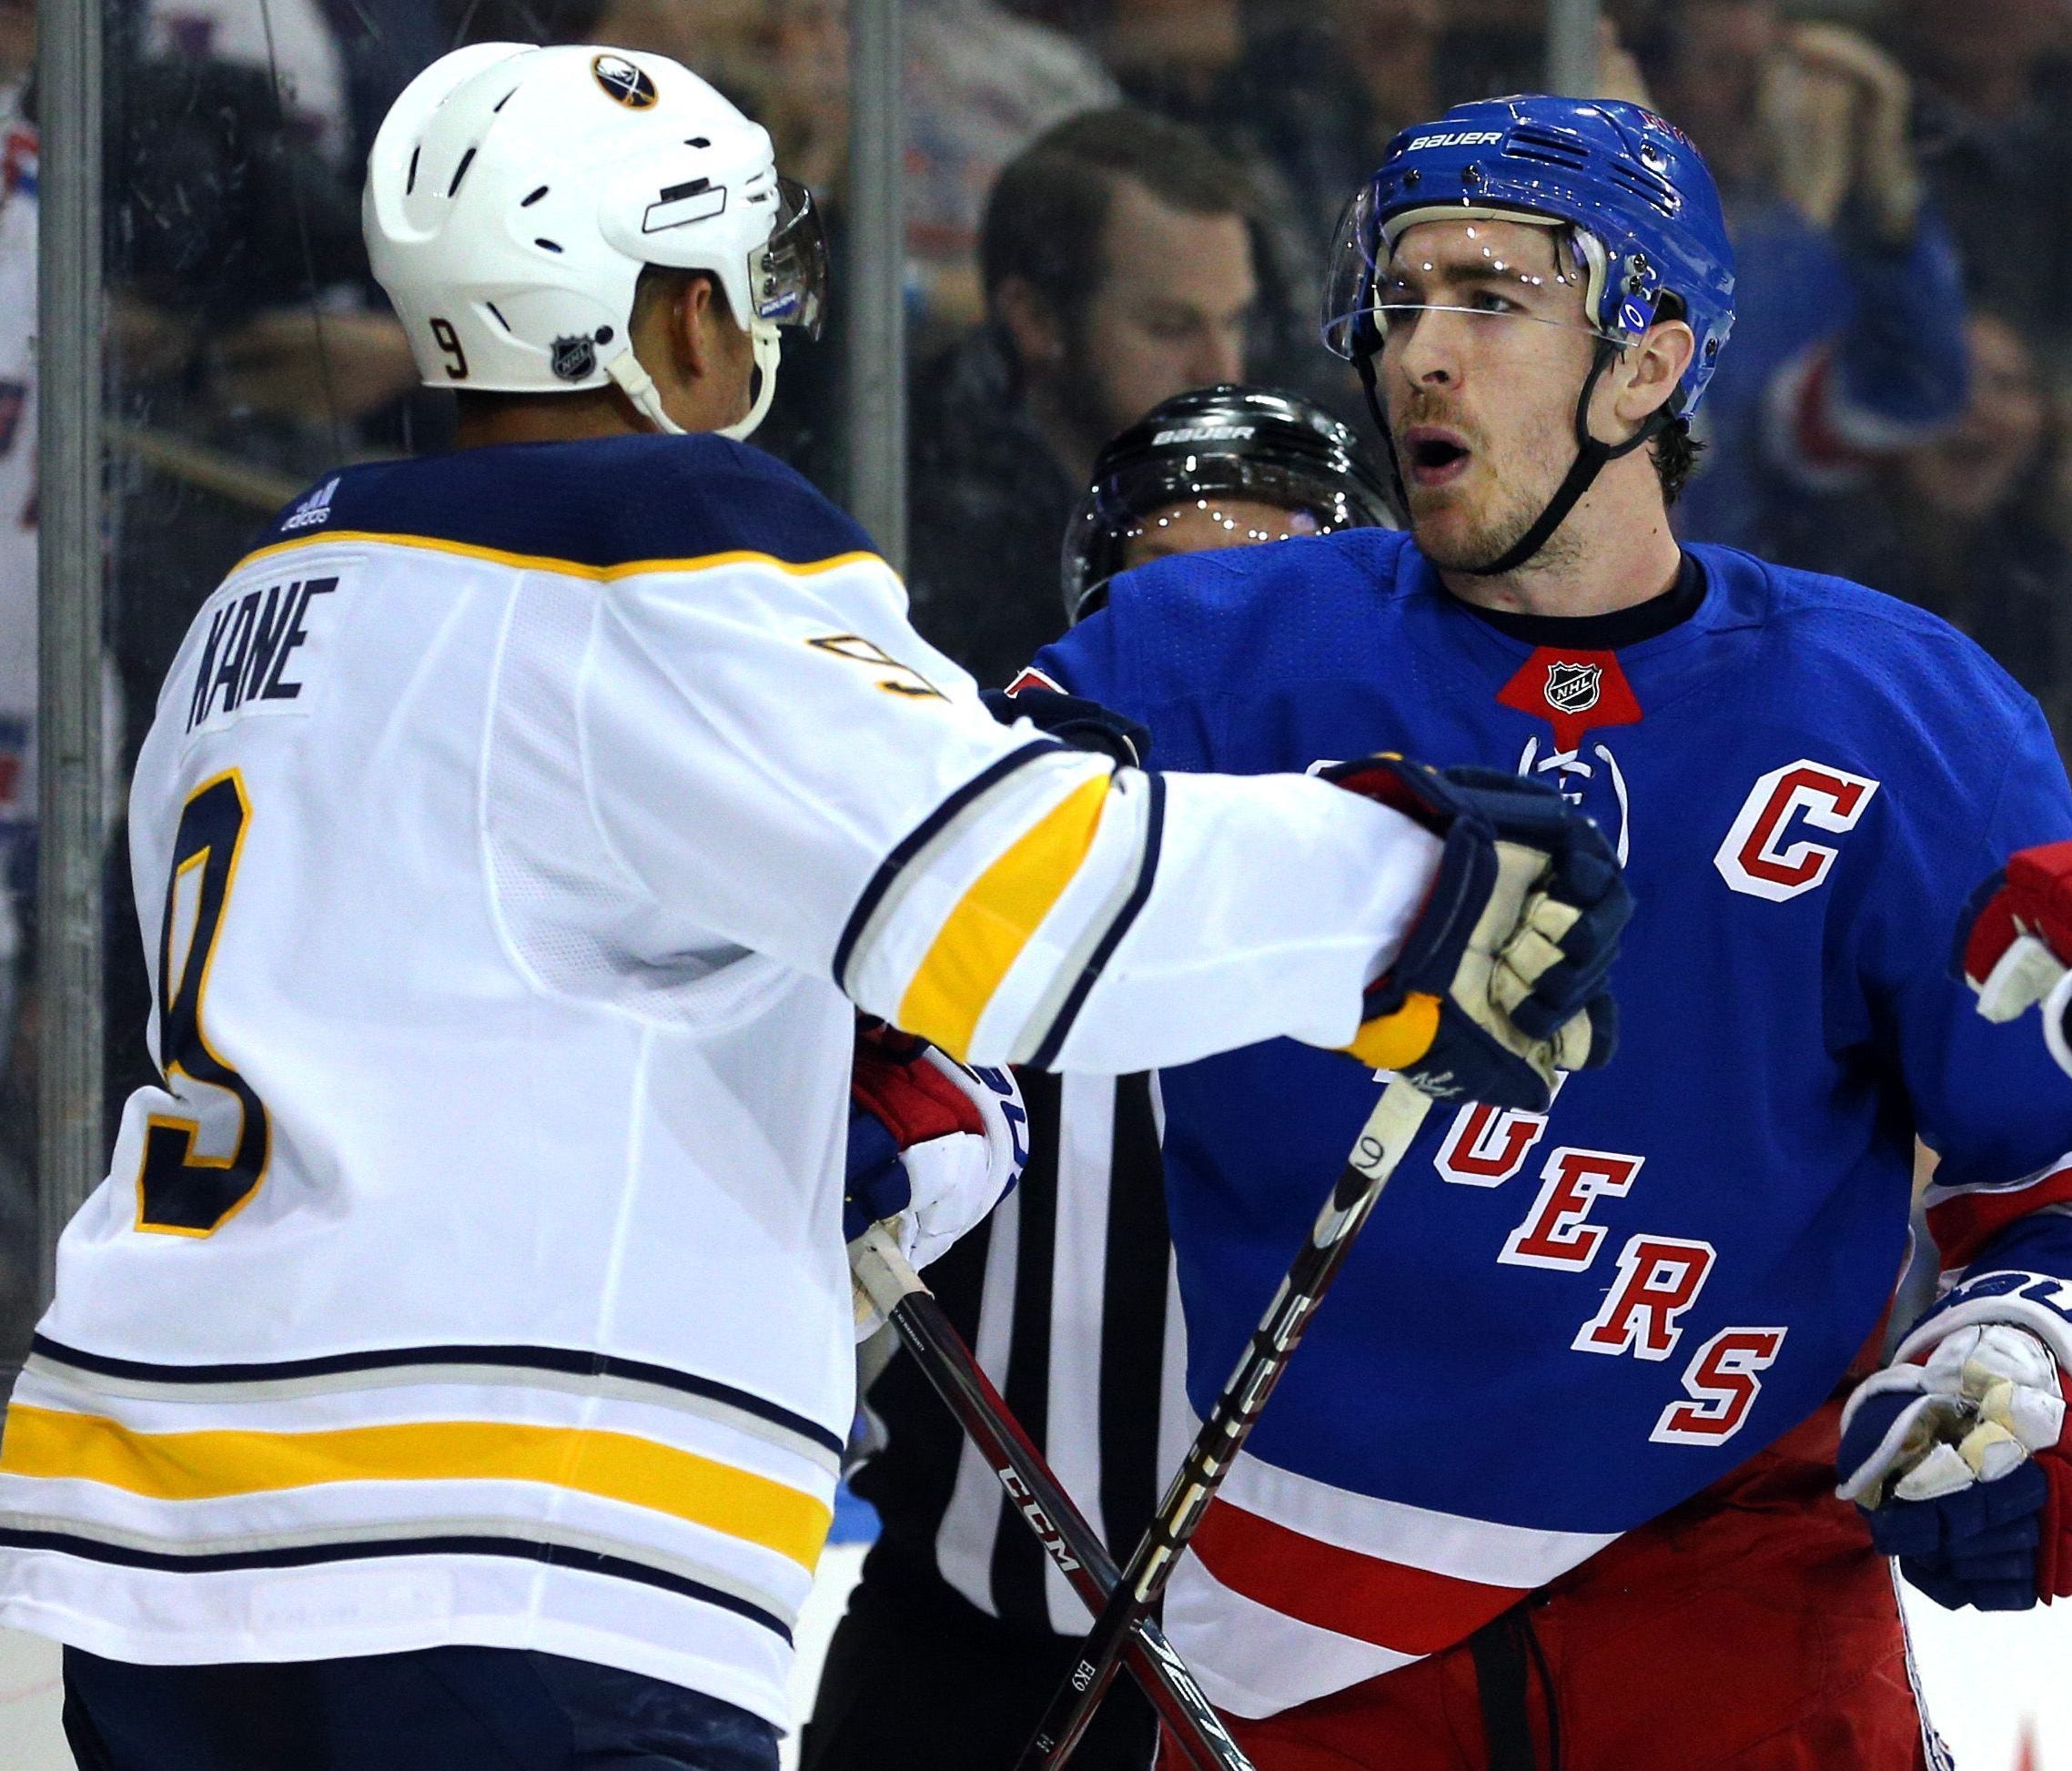 Buffalo Sabres winger Evander Kane (left) and New York Rangers defenseman (right) could be wearing new uniforms by the end of the day.